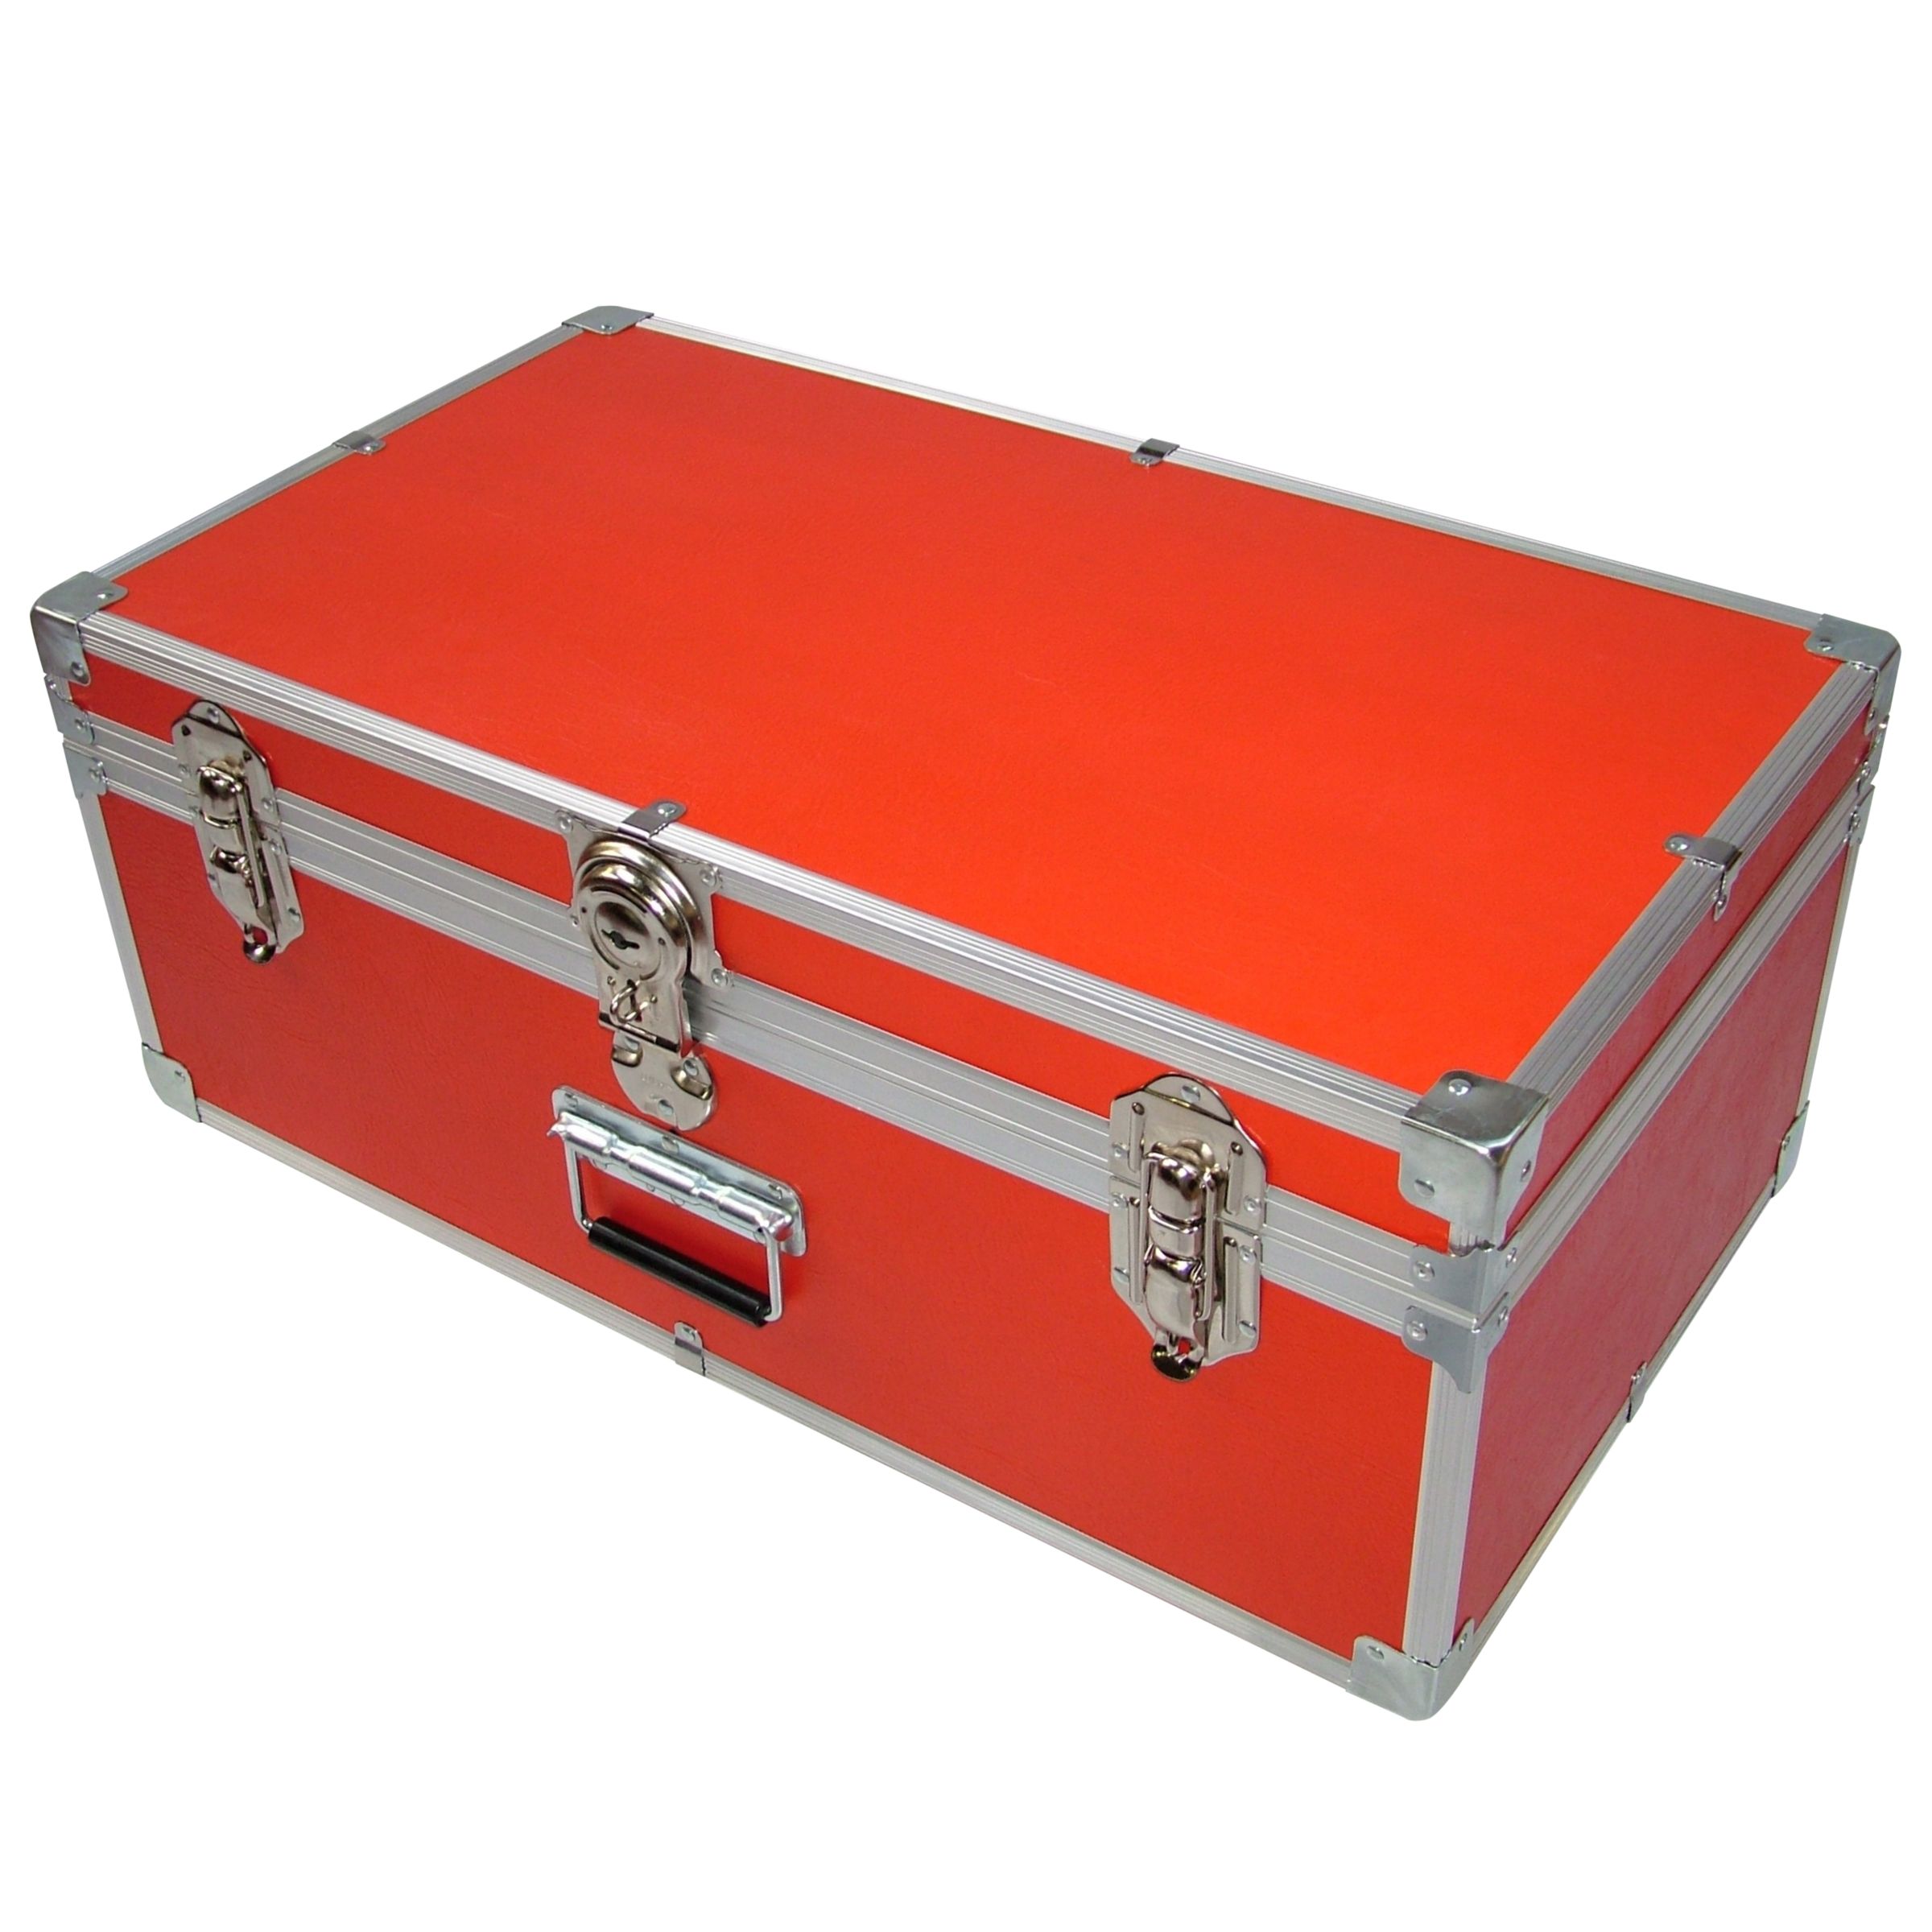 John Lewis Fortified Attache Trunk, Red at JohnLewis